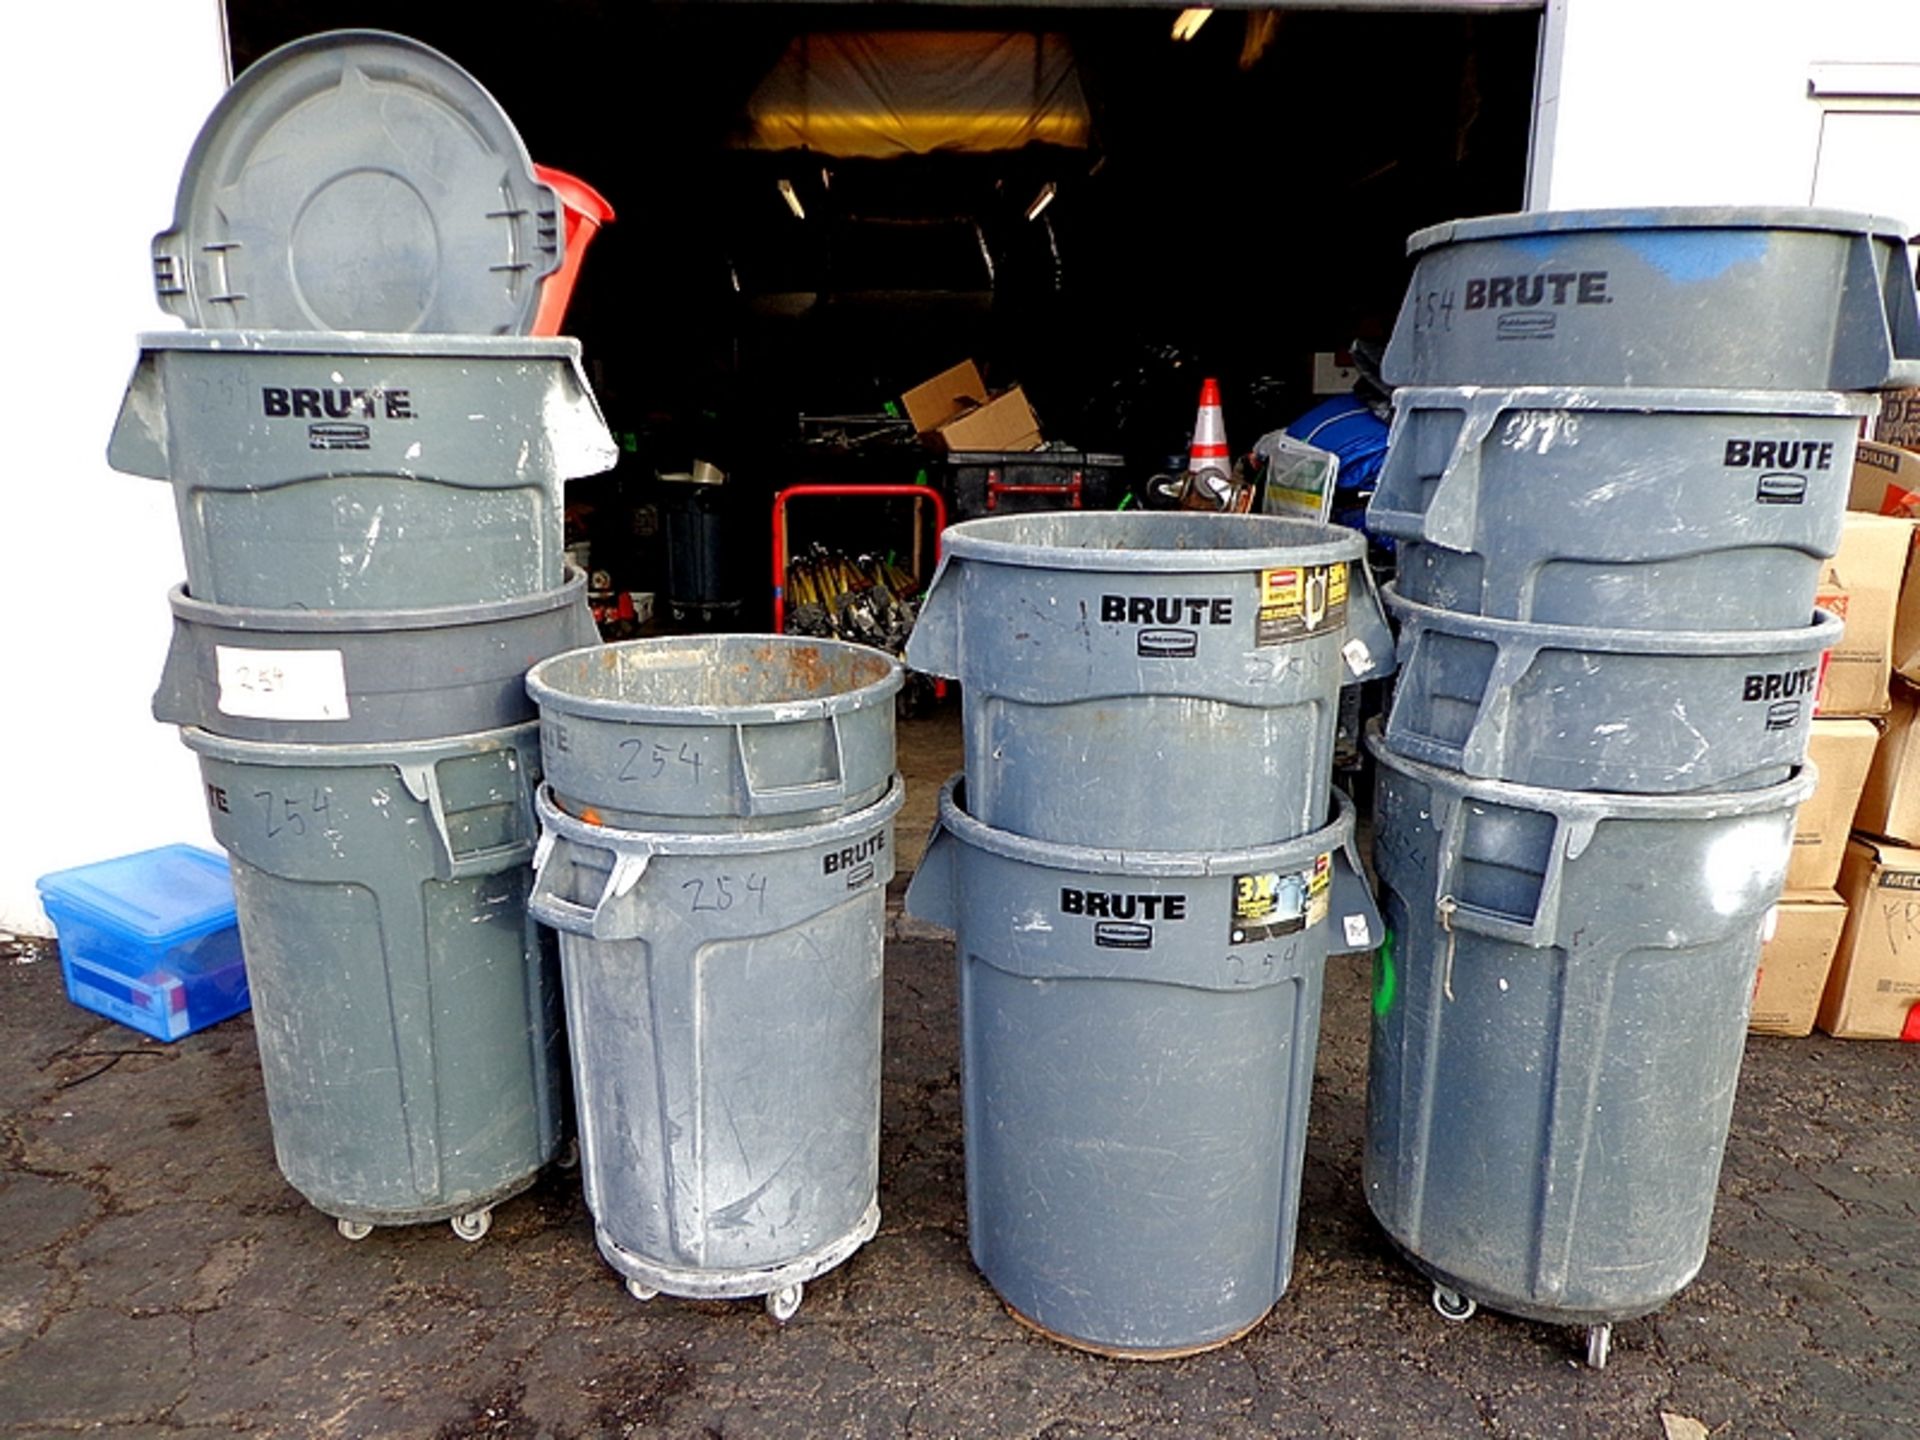 LOT (11) ASSORTED LARGE GARBAGE CANS PLASTIC